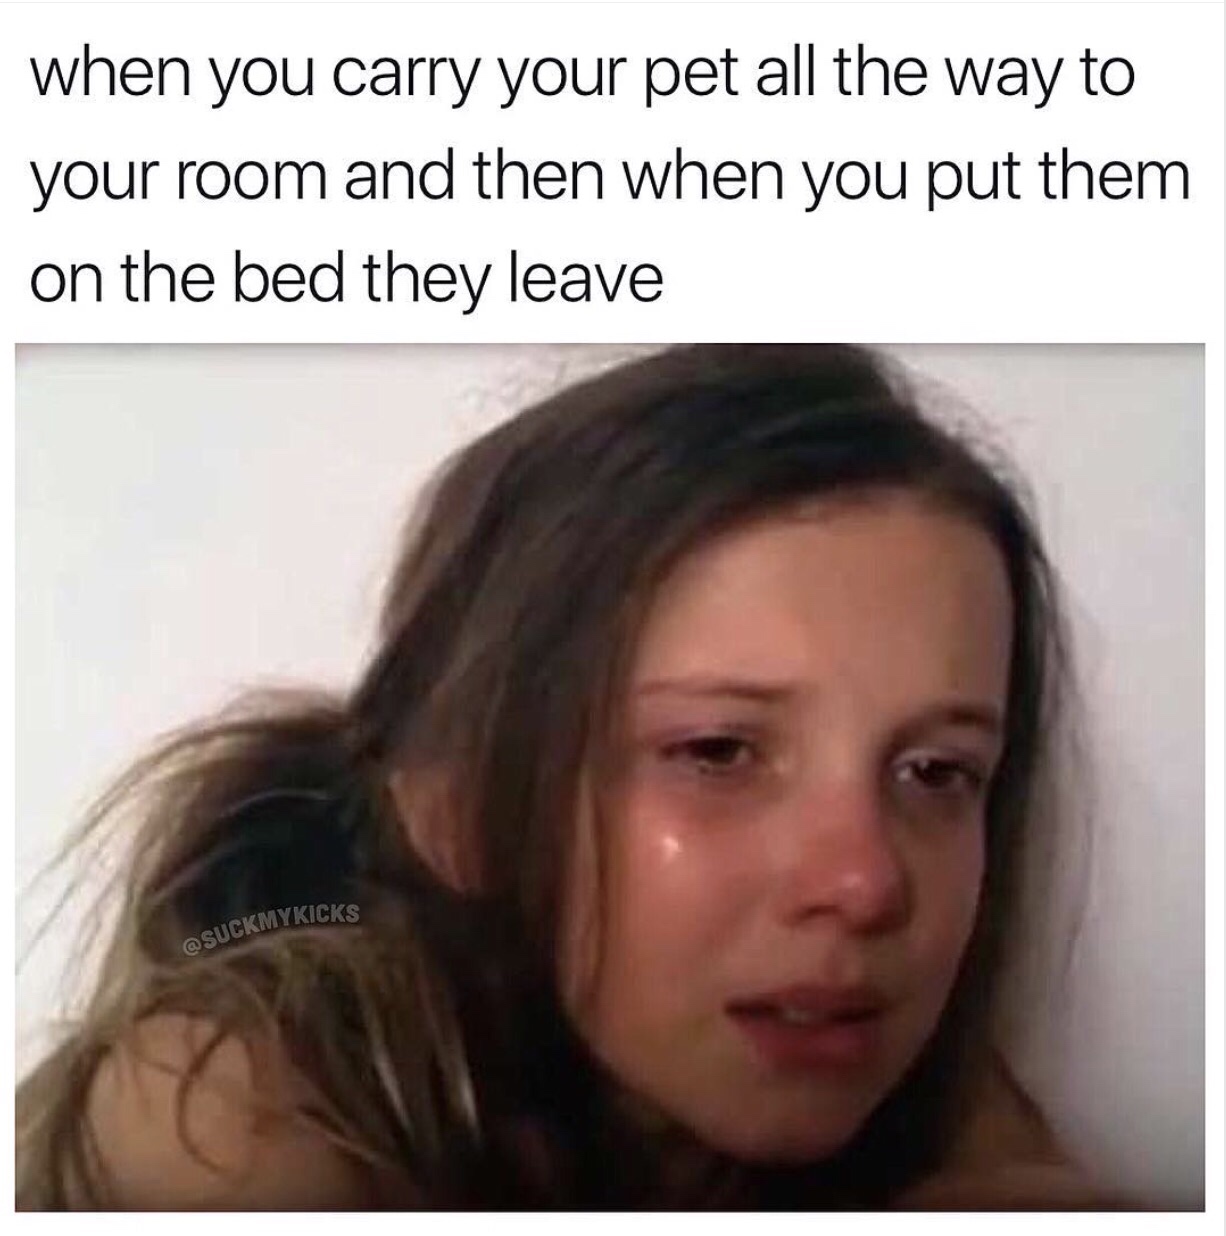 memes - funny memes heartbroken memes - when you carry your pet all the way to your room and then when you put them on the bed they leave